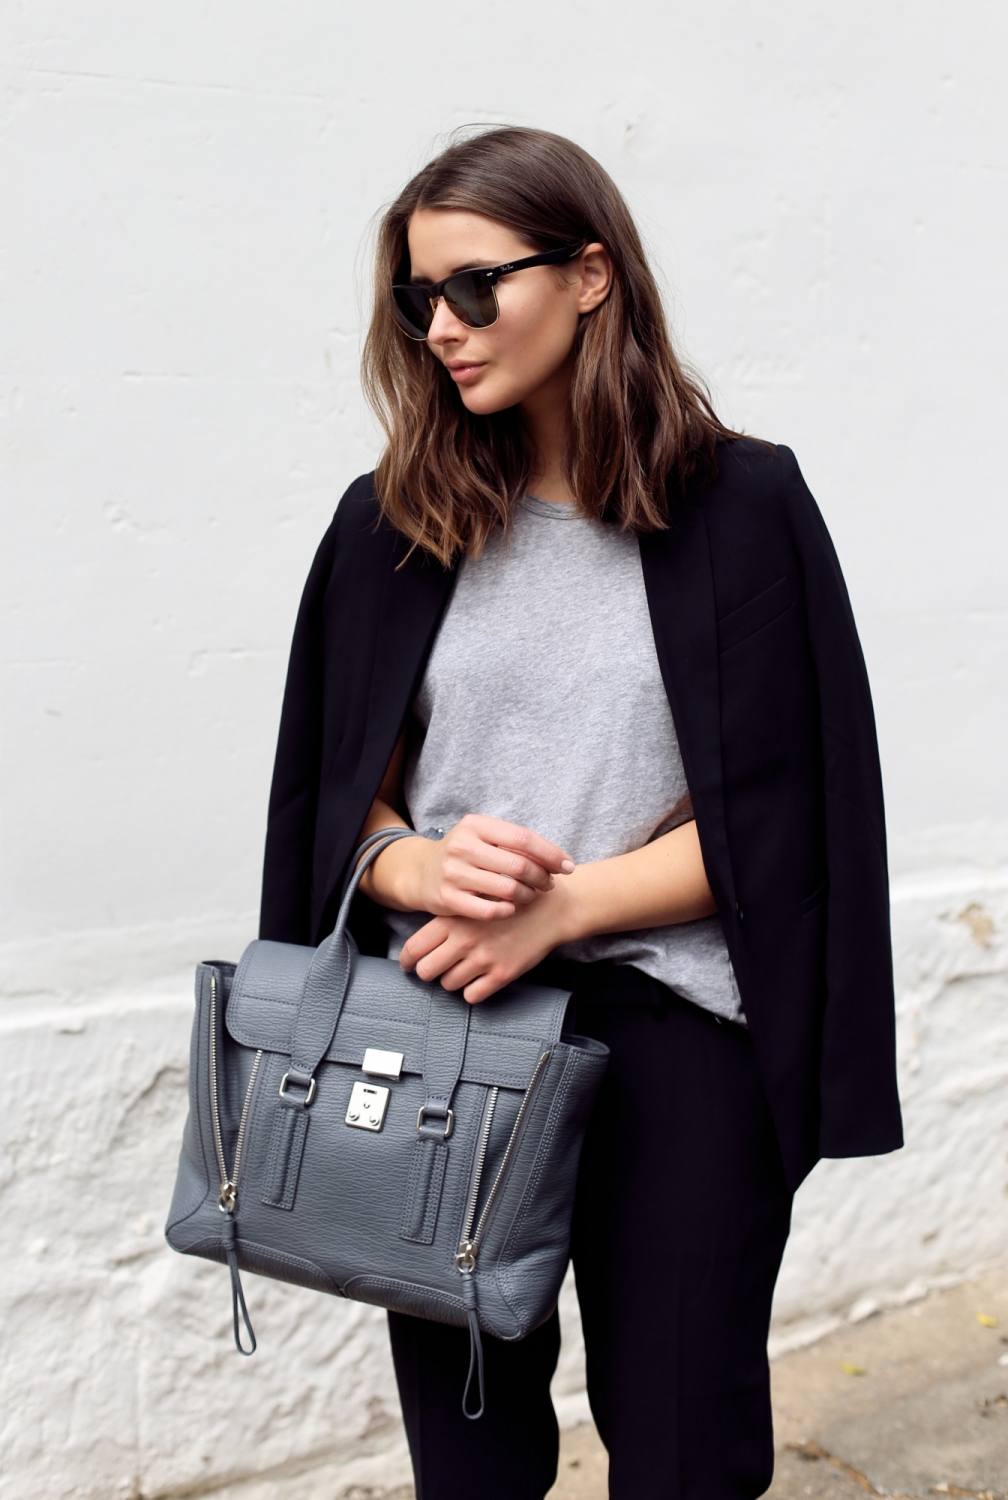 Best Bags for Work - Harper and Harley